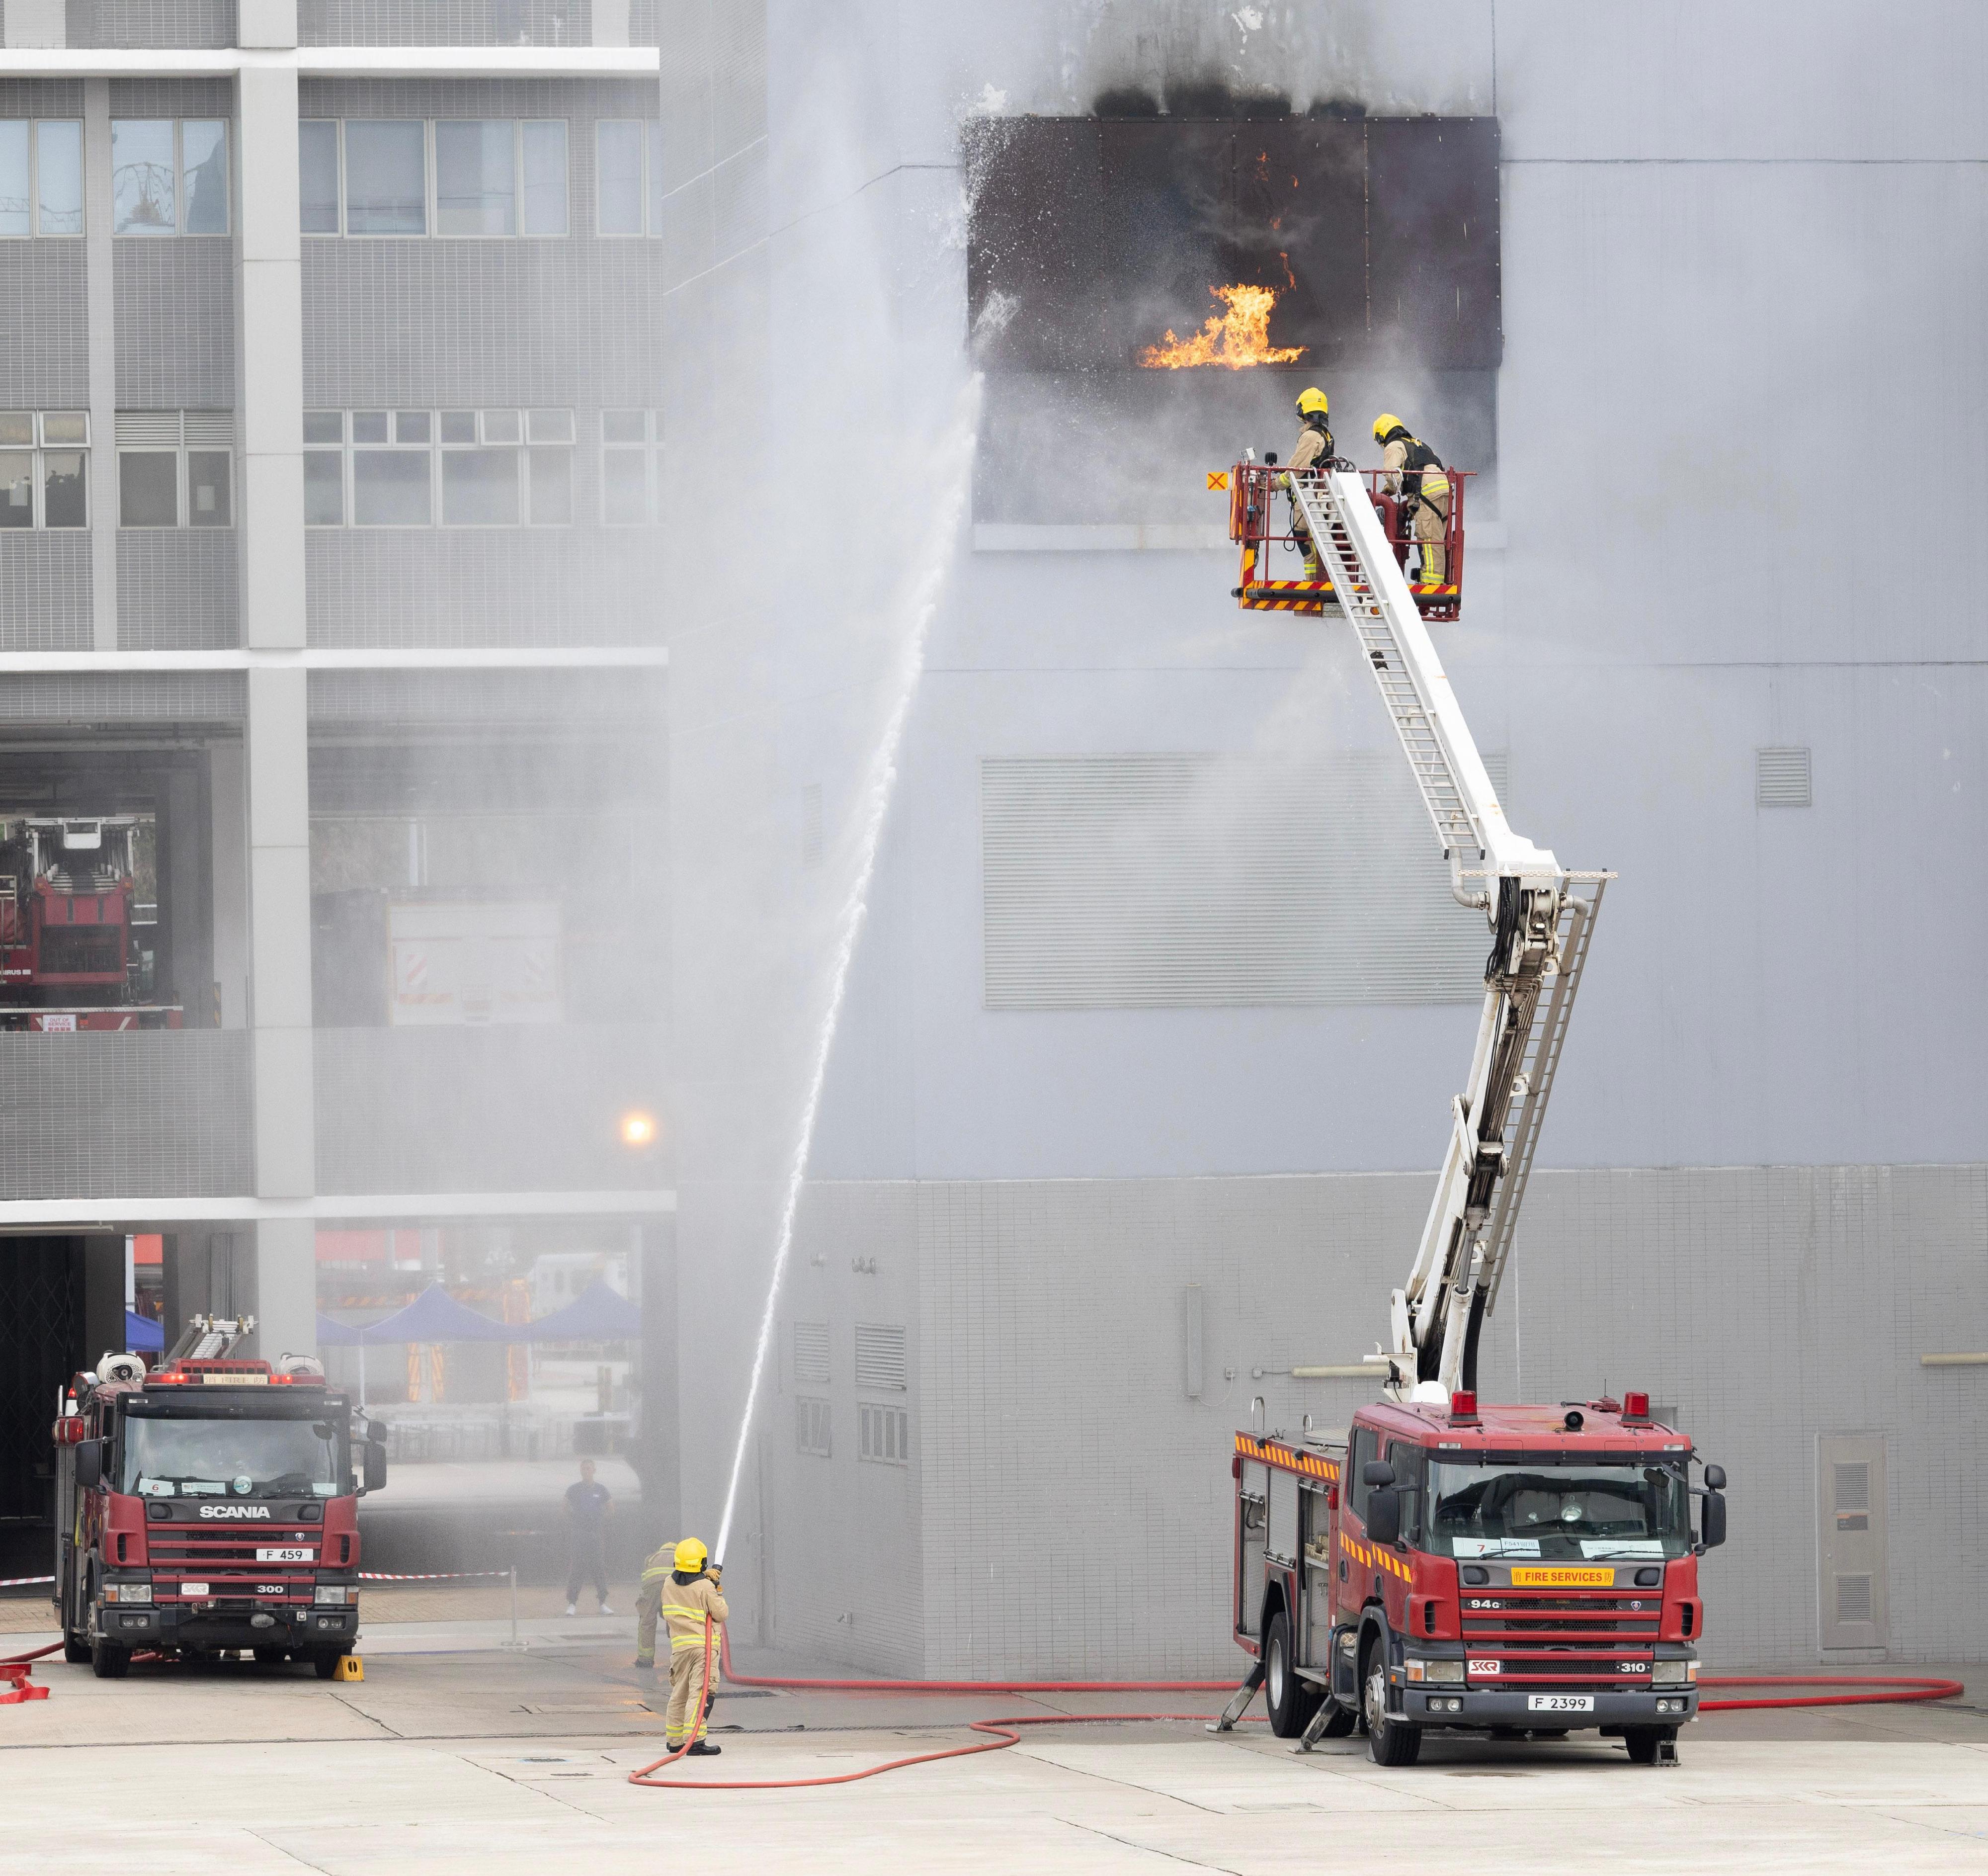 In response to and support of National Security Education Day, the Fire Services Department (FSD) held an open day at the Fire and Ambulance Services Academy in Tseung Kwan O today (April 14). Photo shows FSD personnel performing firefighting demonstration.